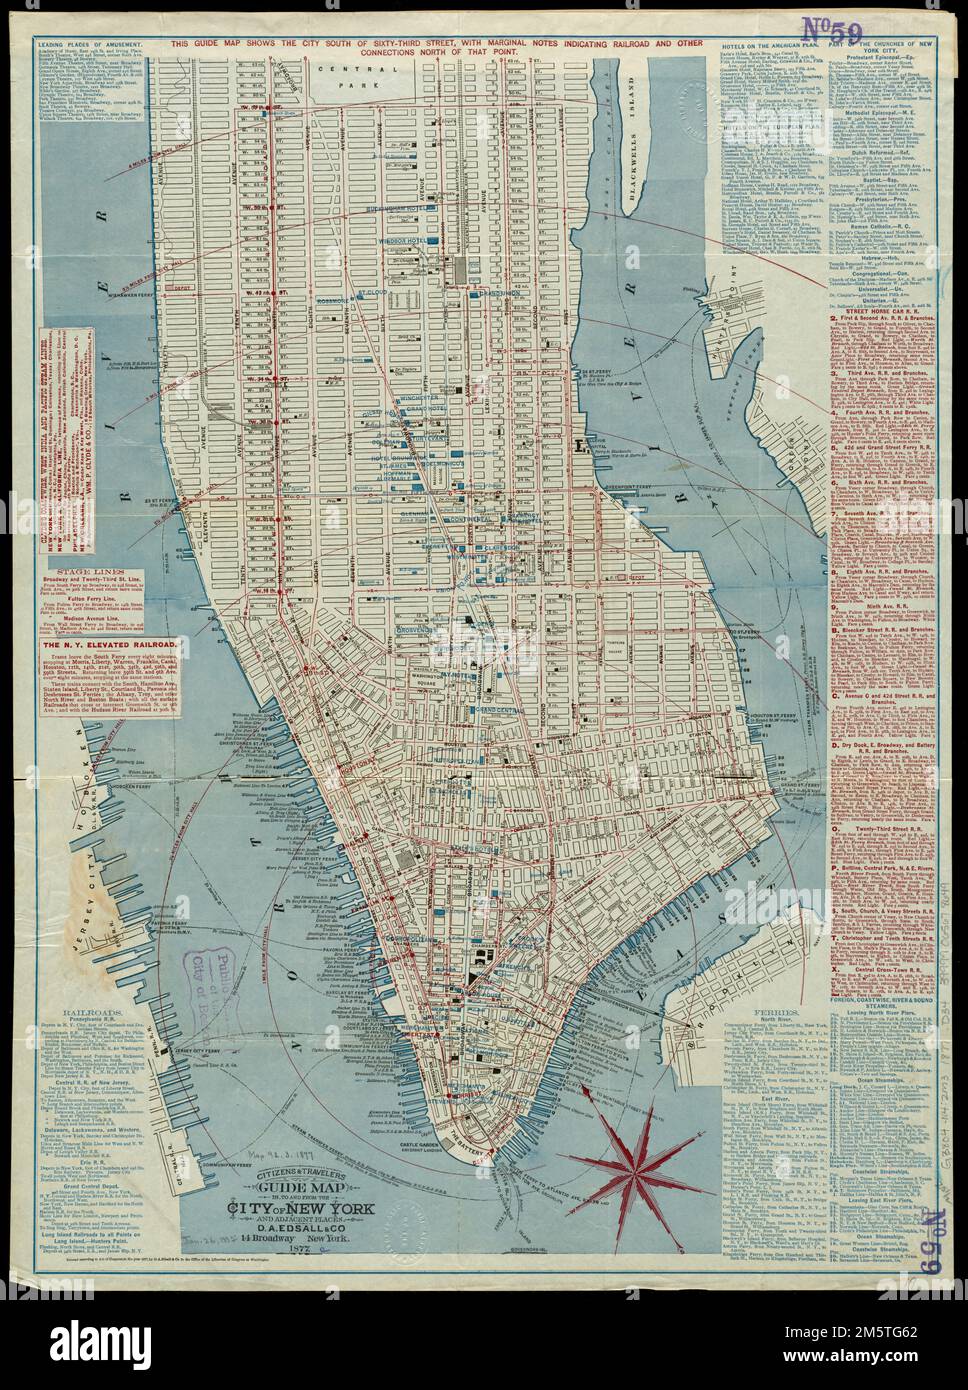 Citizens & travelers guide map in, to and from the city of New York and  adjacent places. Oriented with north to the upper left. Shows radial  distances from City Hall and ferry